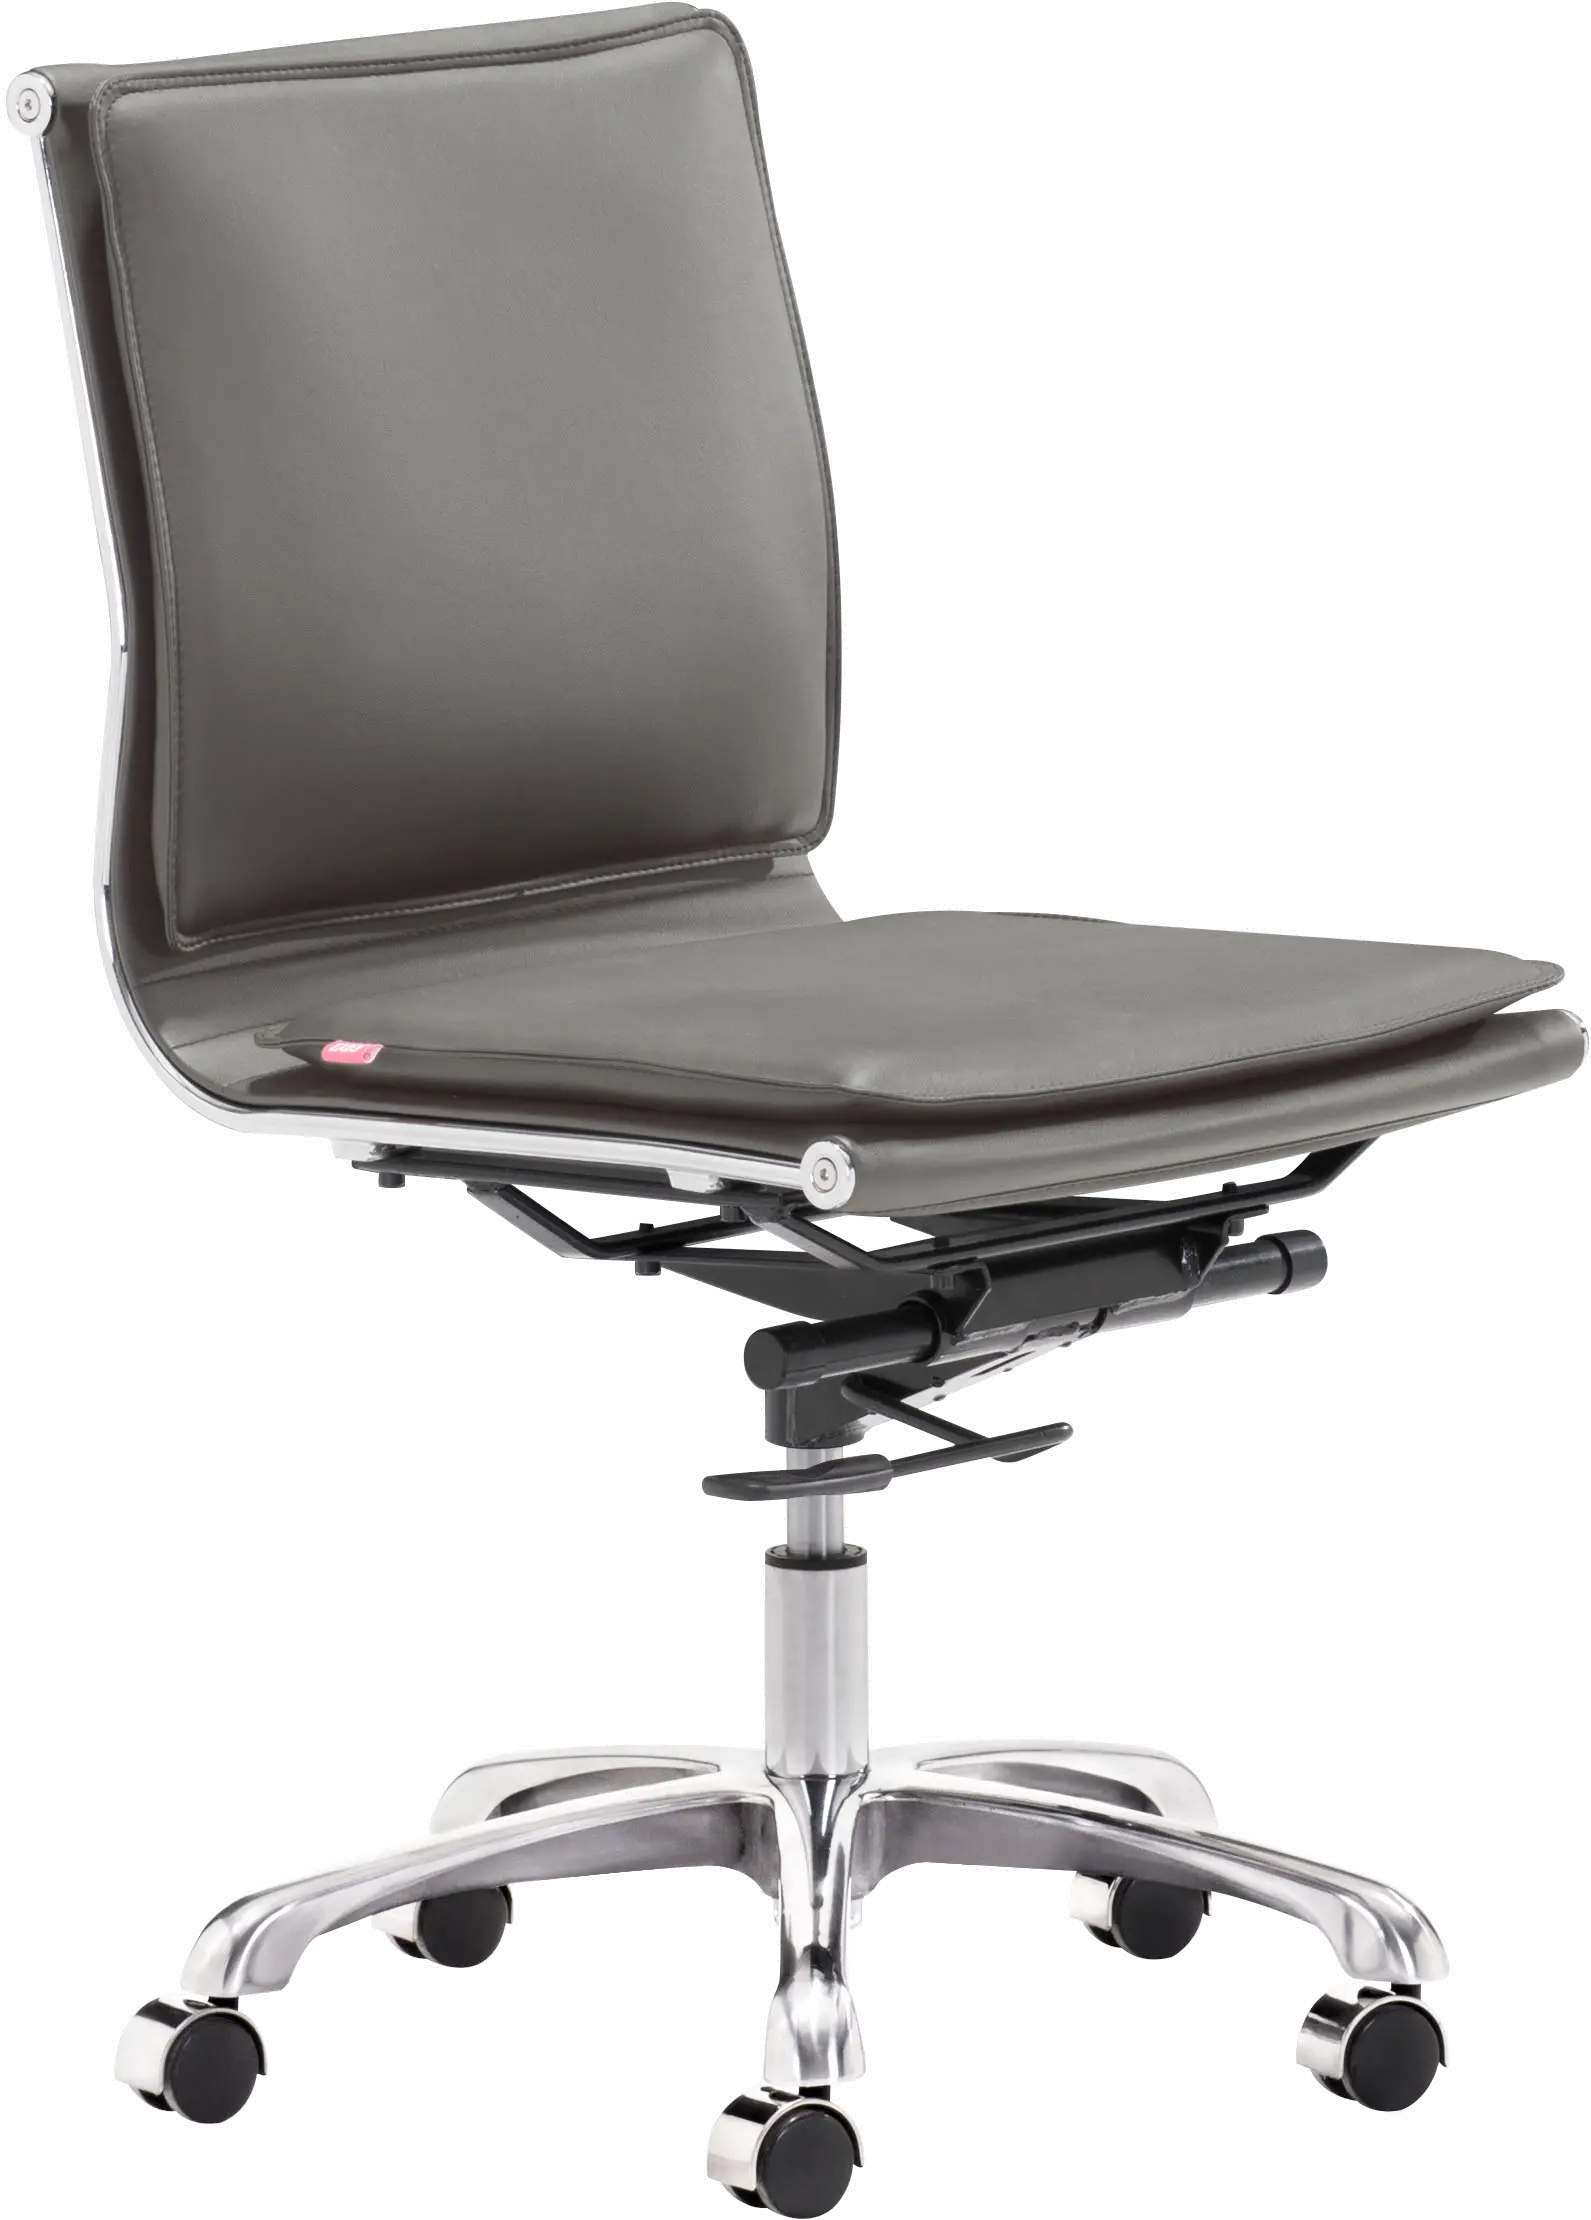 Simple Padded Gray Office Chair - Lider Plus